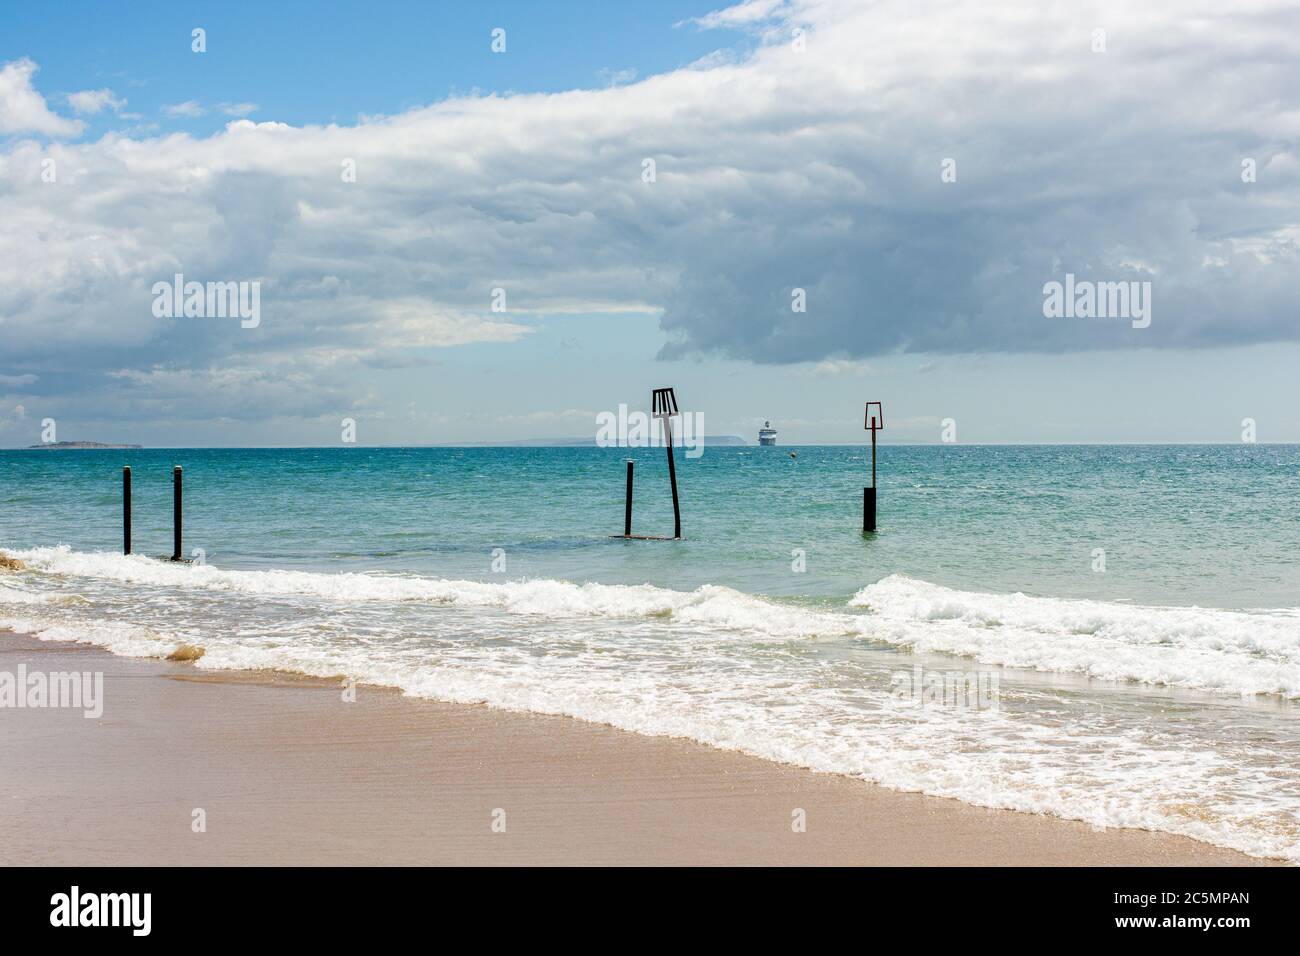 Cruise ship anchored off the coast of the Isle of Wight during the coronavirus outbreak in 2020 as seen from Branksome Chine Beach, Poole, Dorset, UK Stock Photo